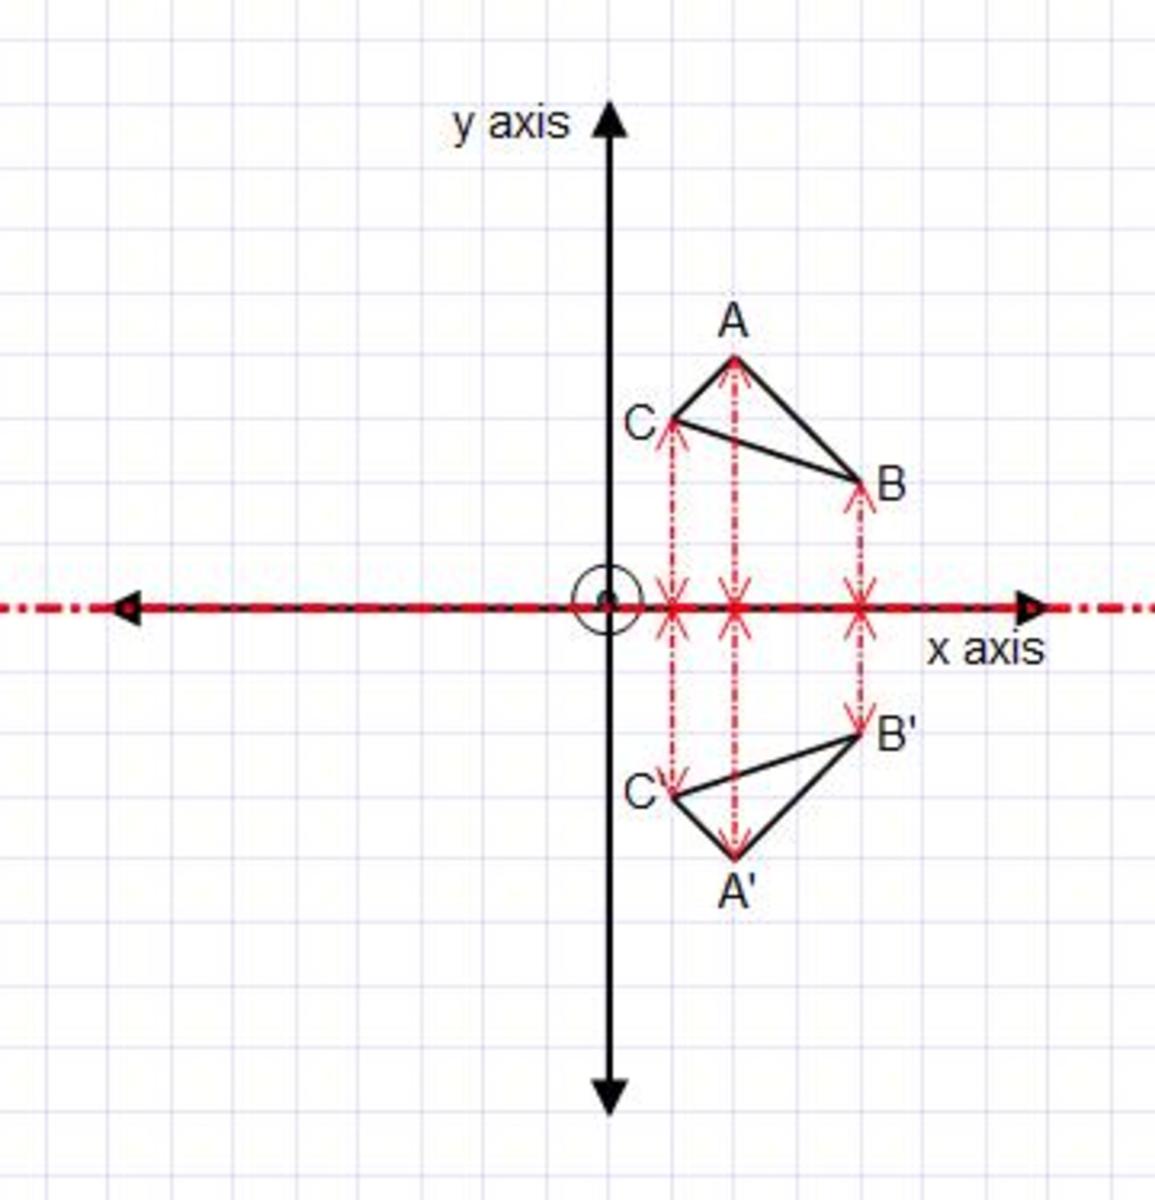 Examples on how to reflect a shape in the x-axis or y-axis on a